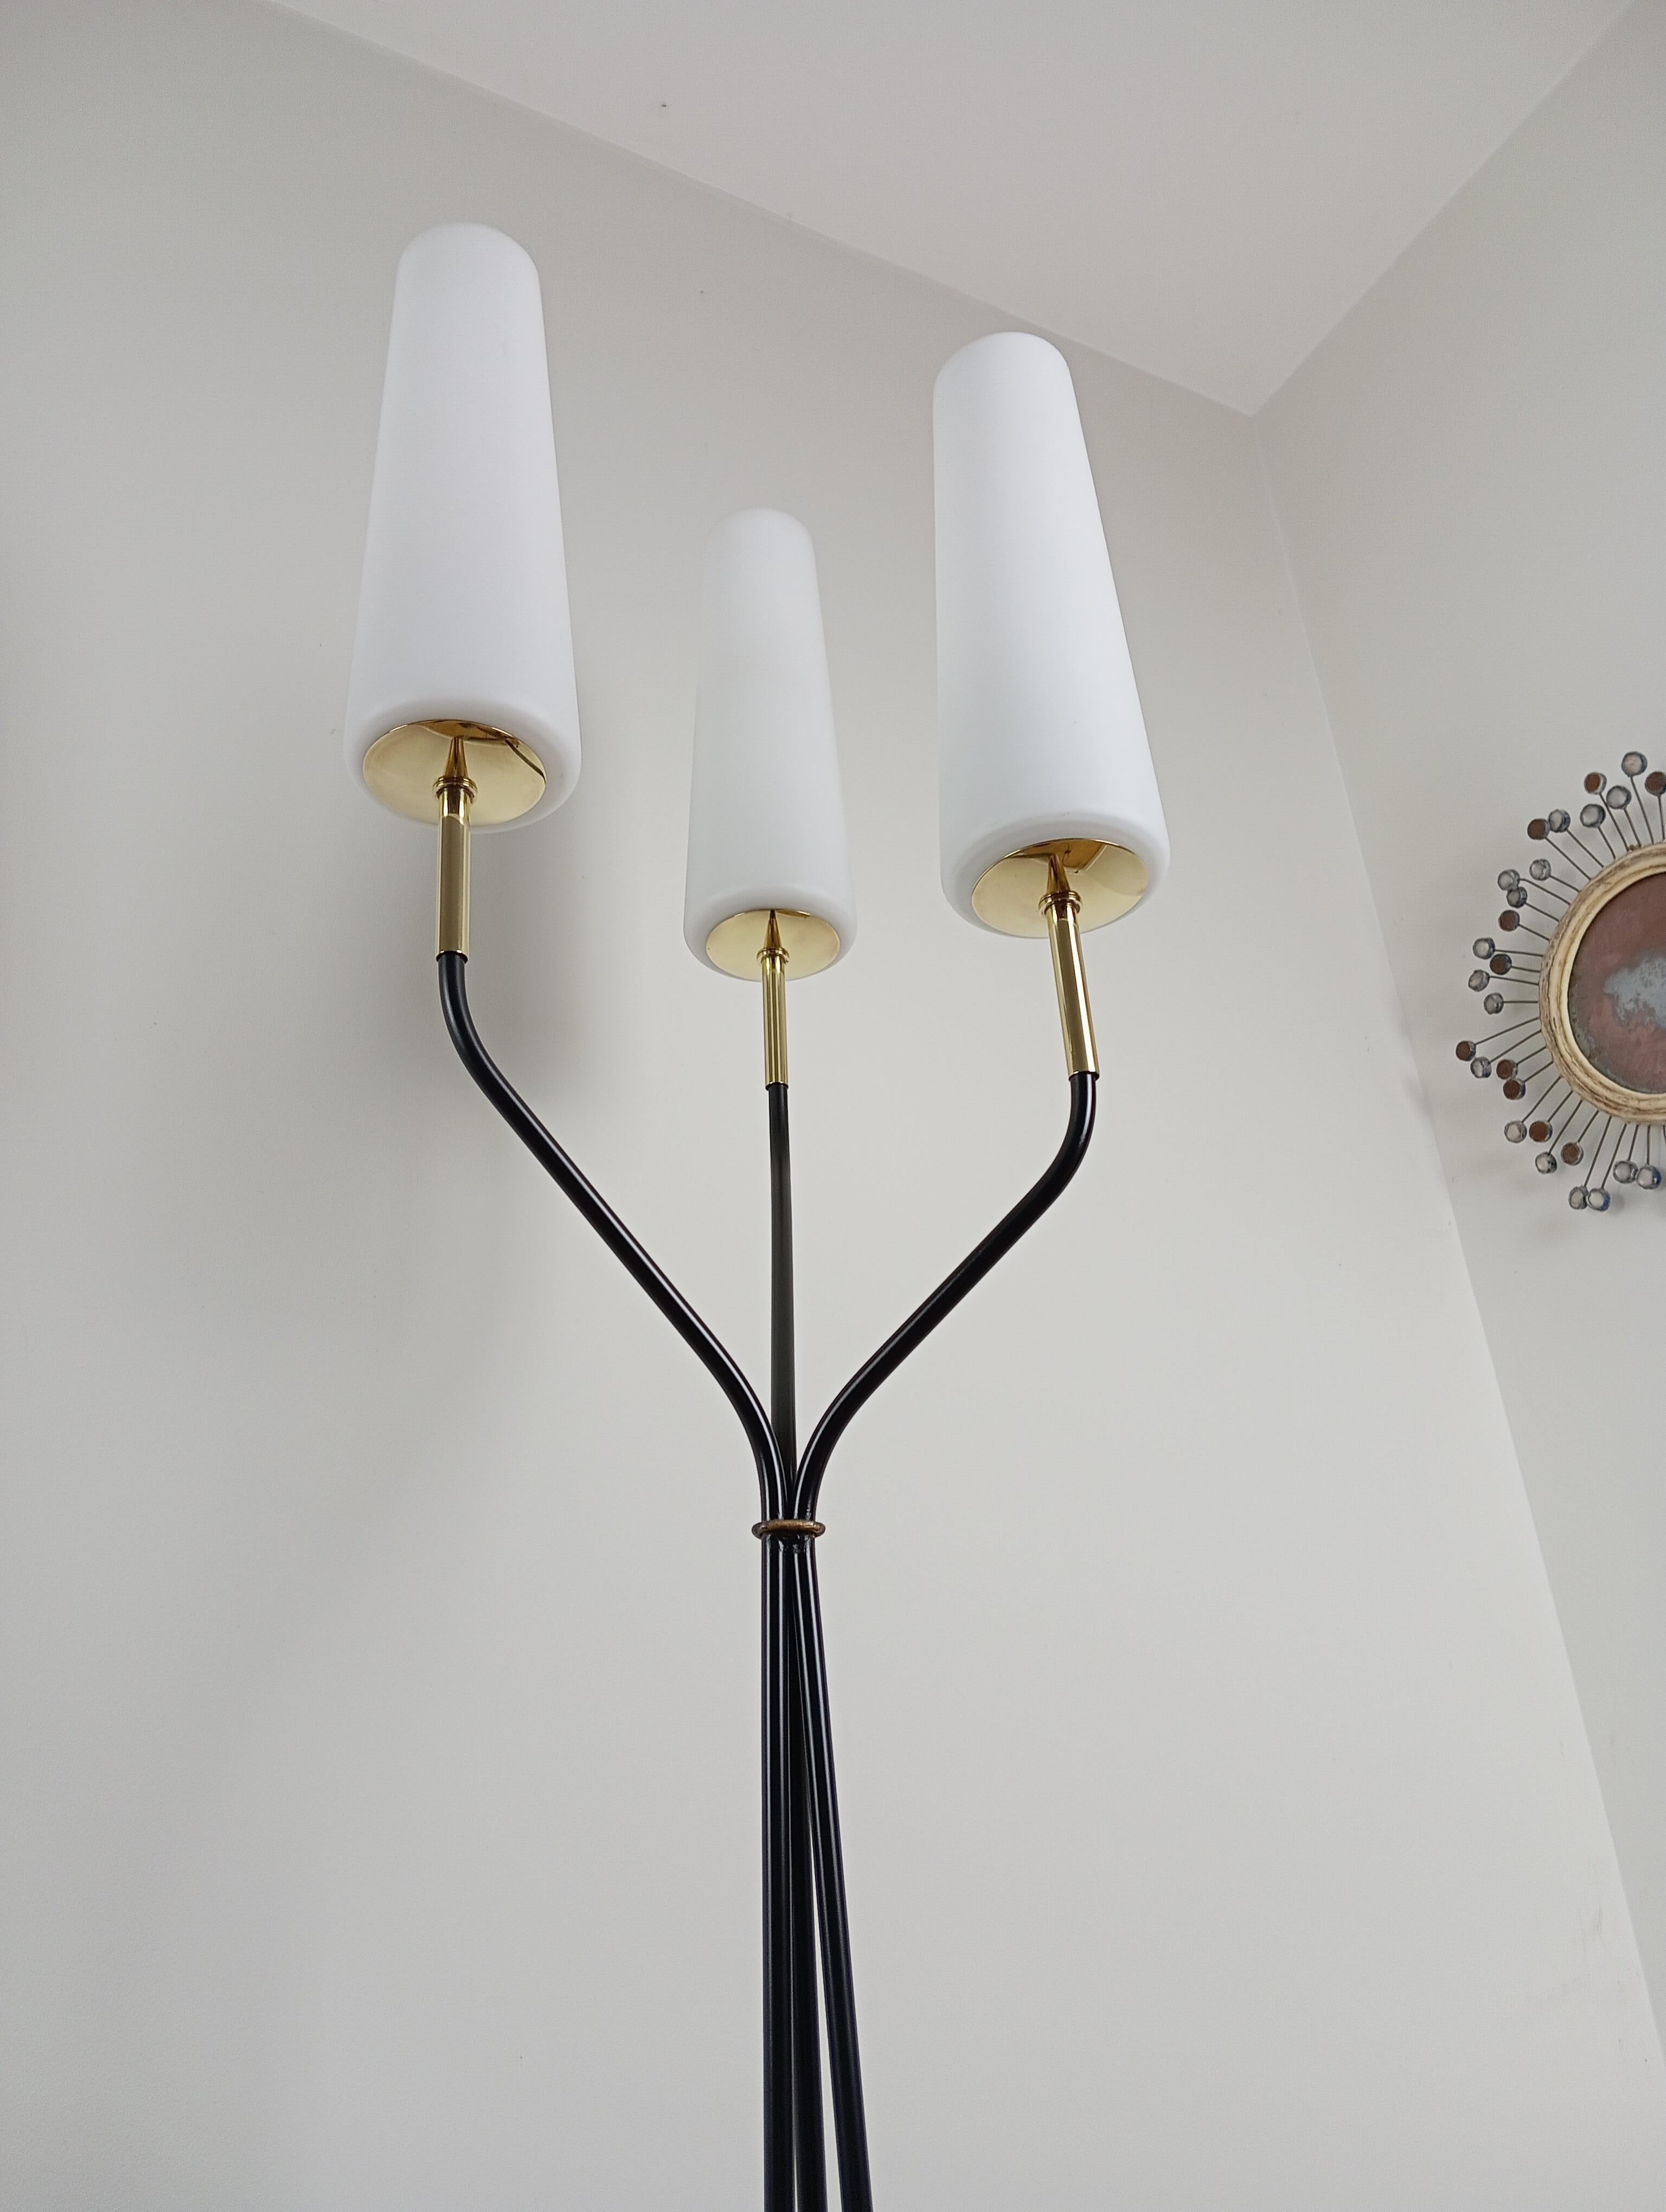 Floor lamp with 3 light arms, Maison Lunel circa 1950 For Sale 10